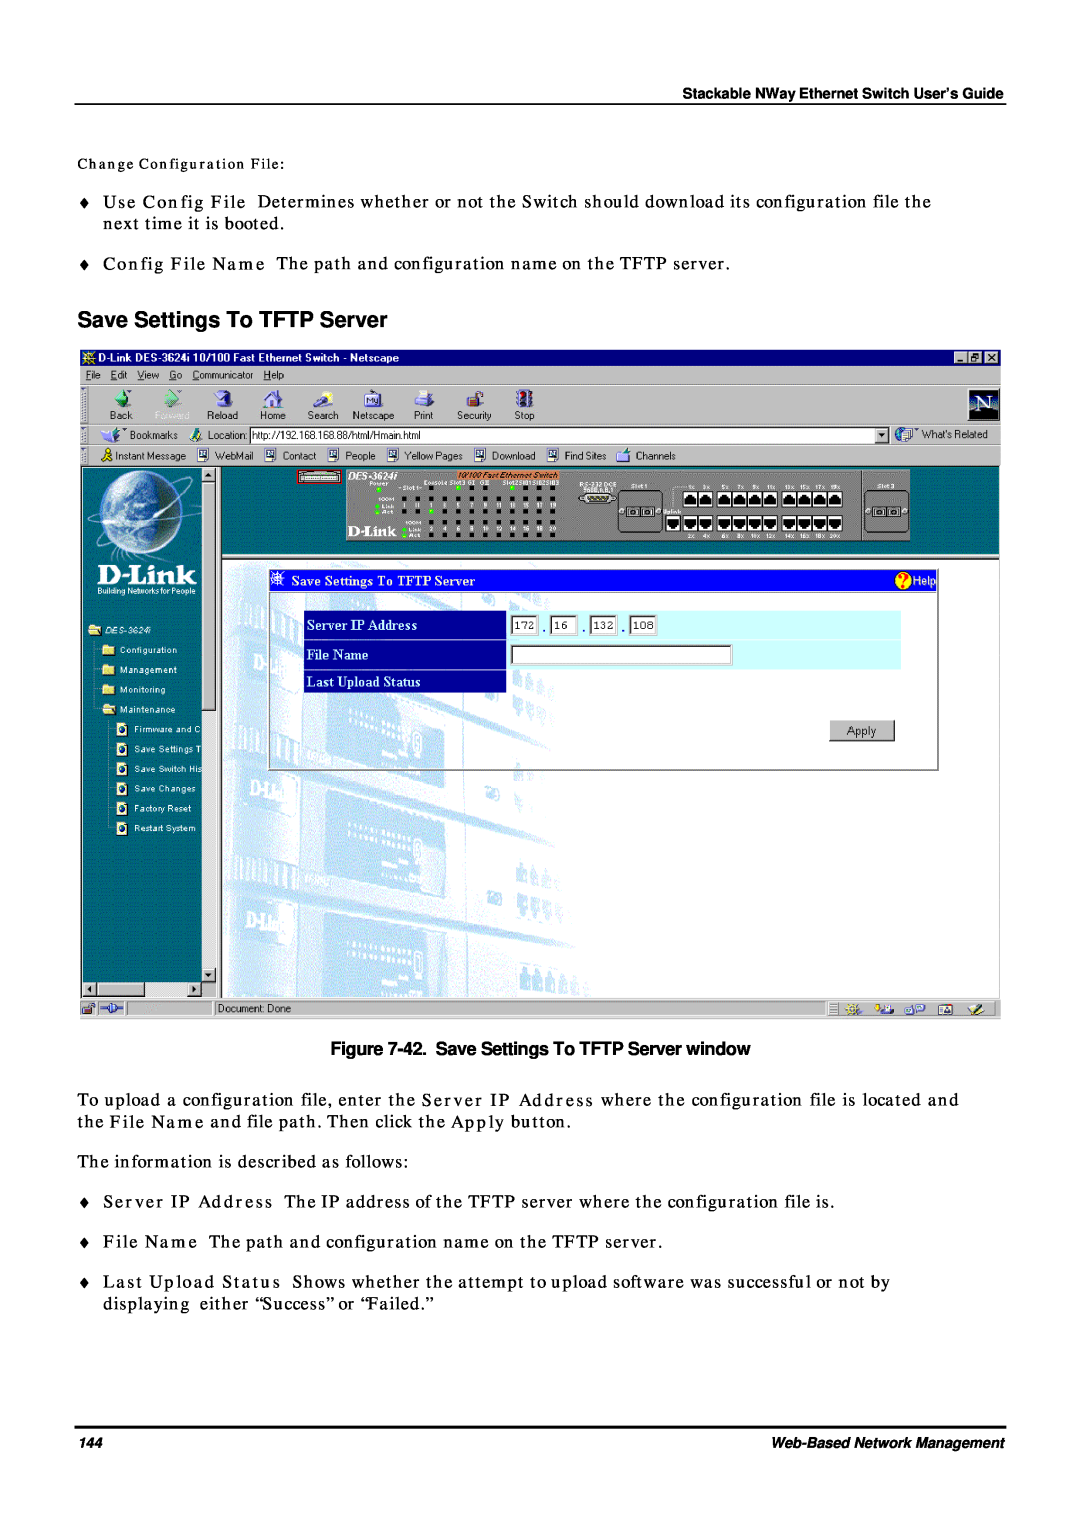 D-Link DES-3624 manual 42. Save Settings To TFTP Server window 